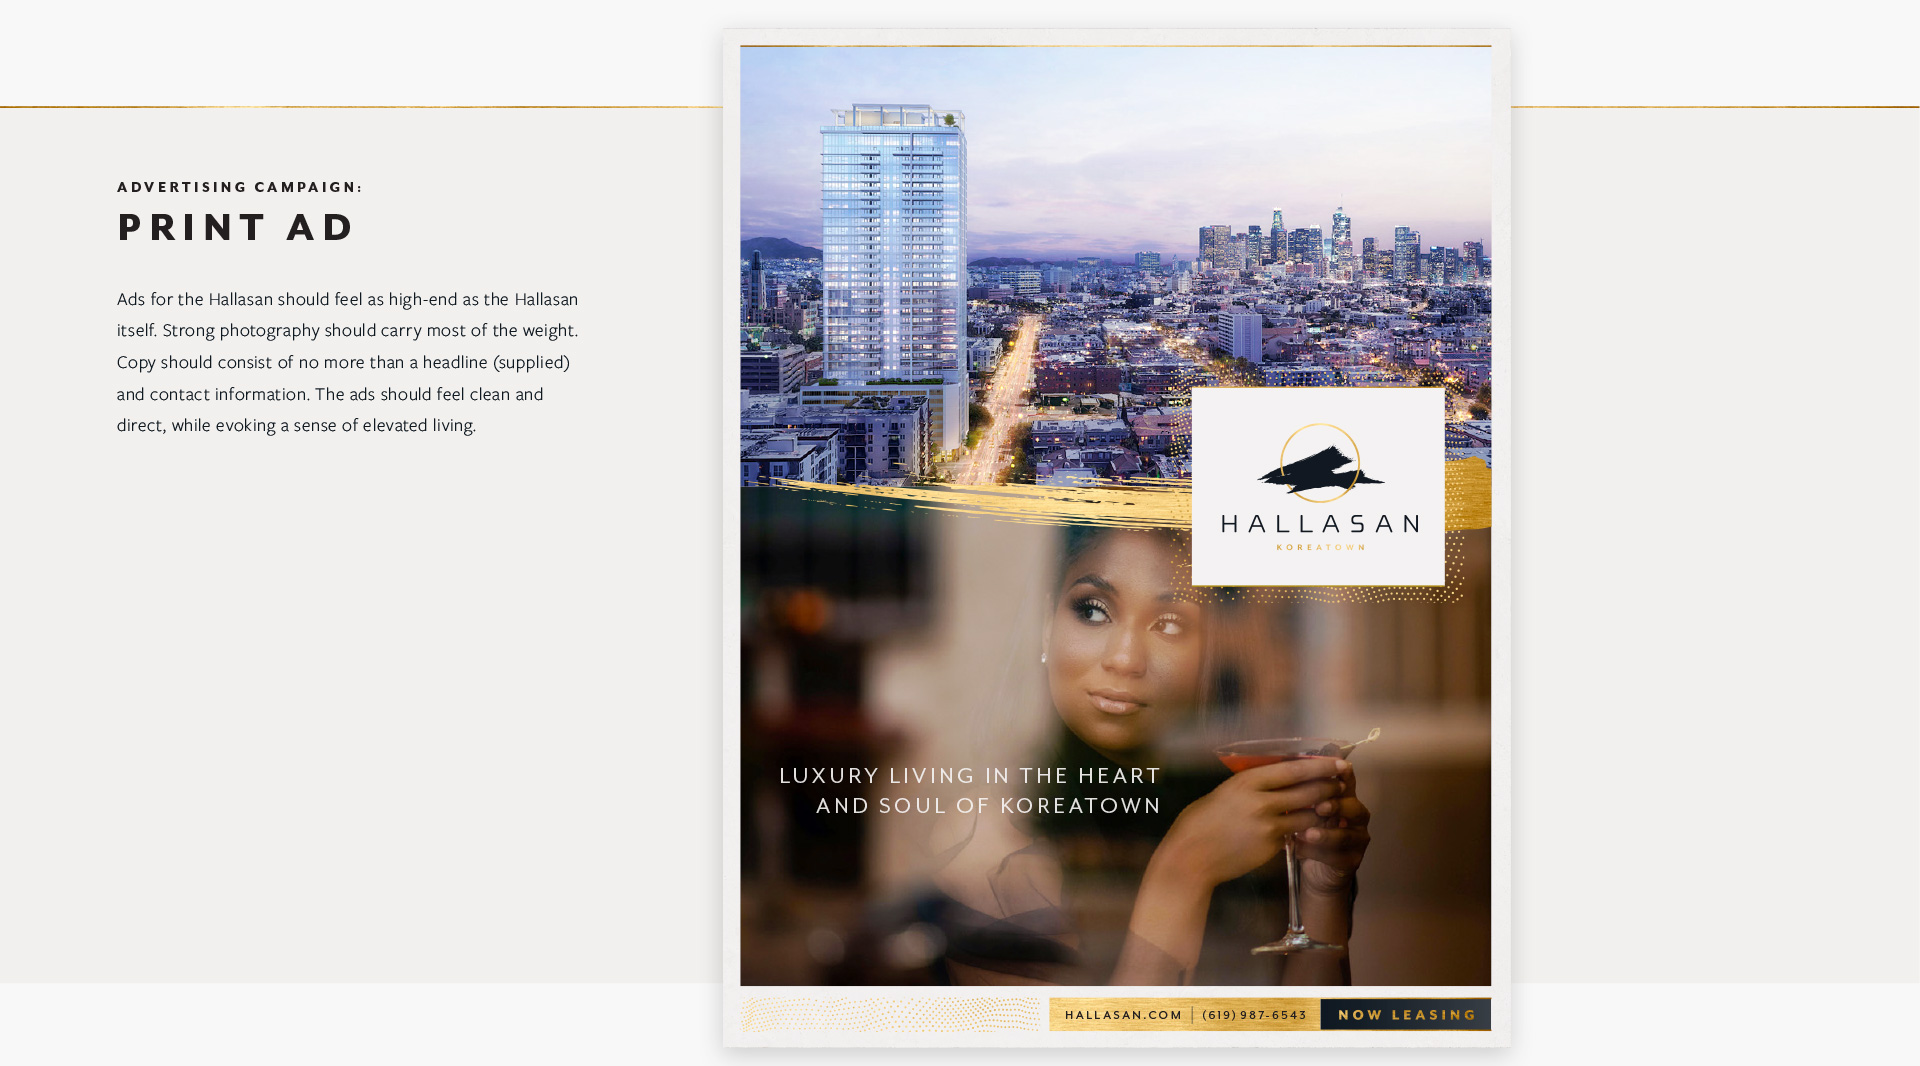 Print ad concept created for Hallasan Luxury Apartments brand